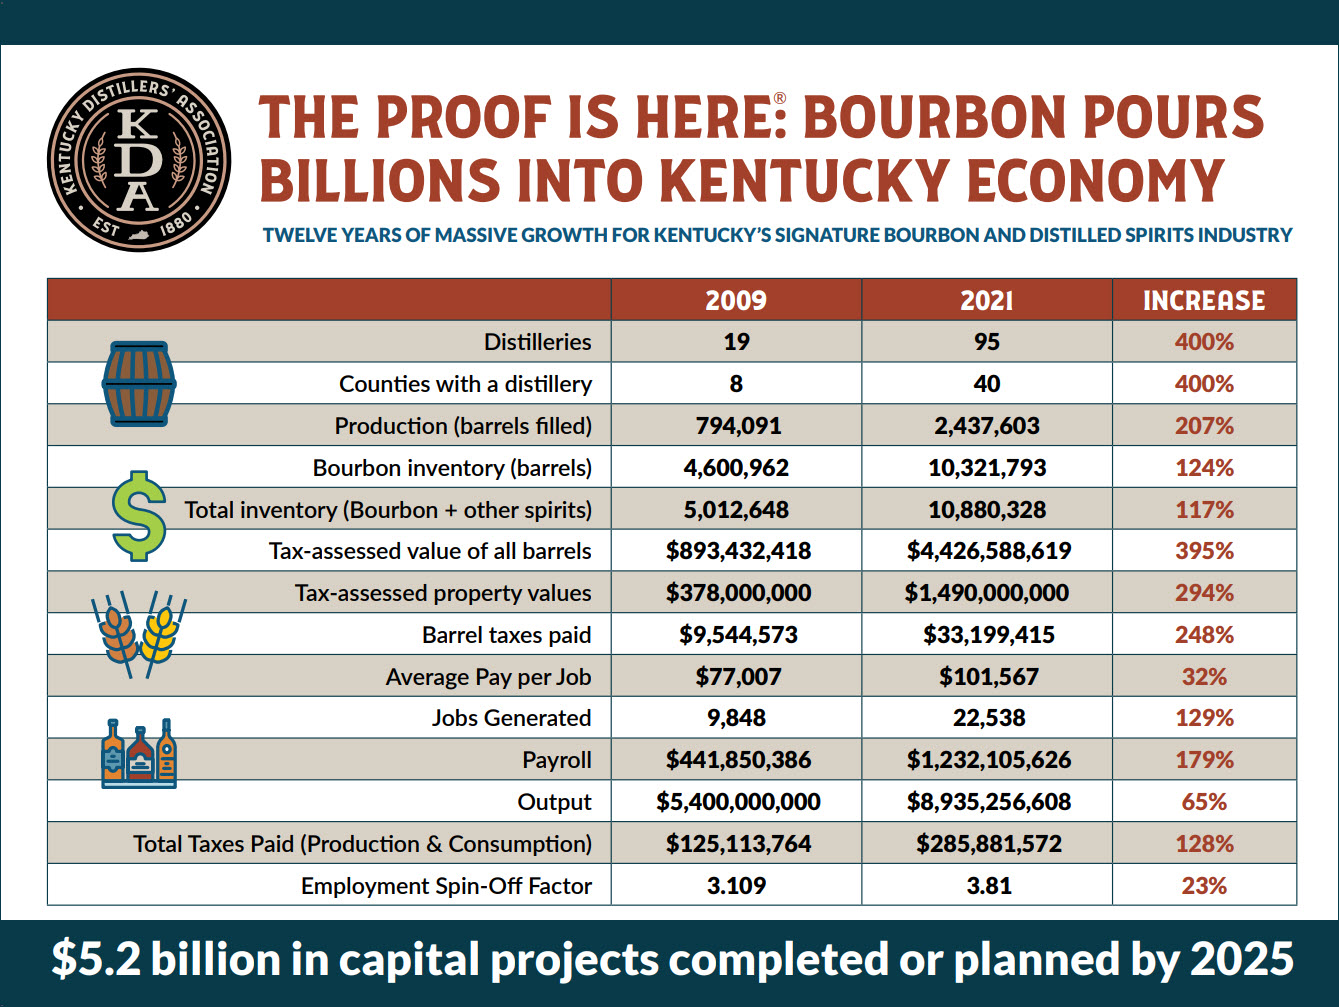 Kentucky Distillers' Association - The Proof is Here - Bourbon Pours Billions into Kentucky Economy